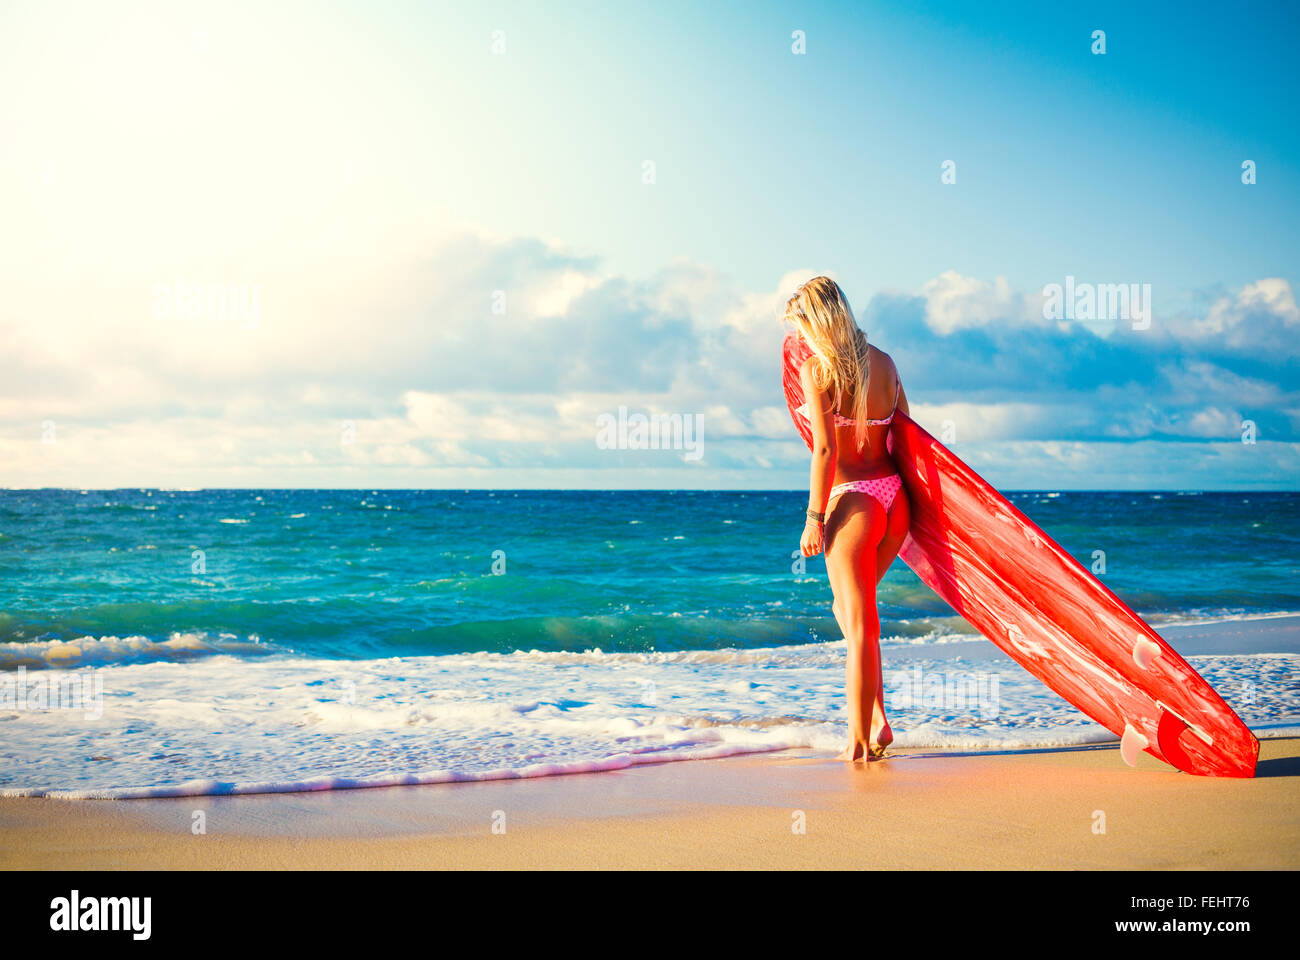 Beautiful Blonde Surfer Girl on the Beach at Sunset. Summer Lifestyle. Stock Photo